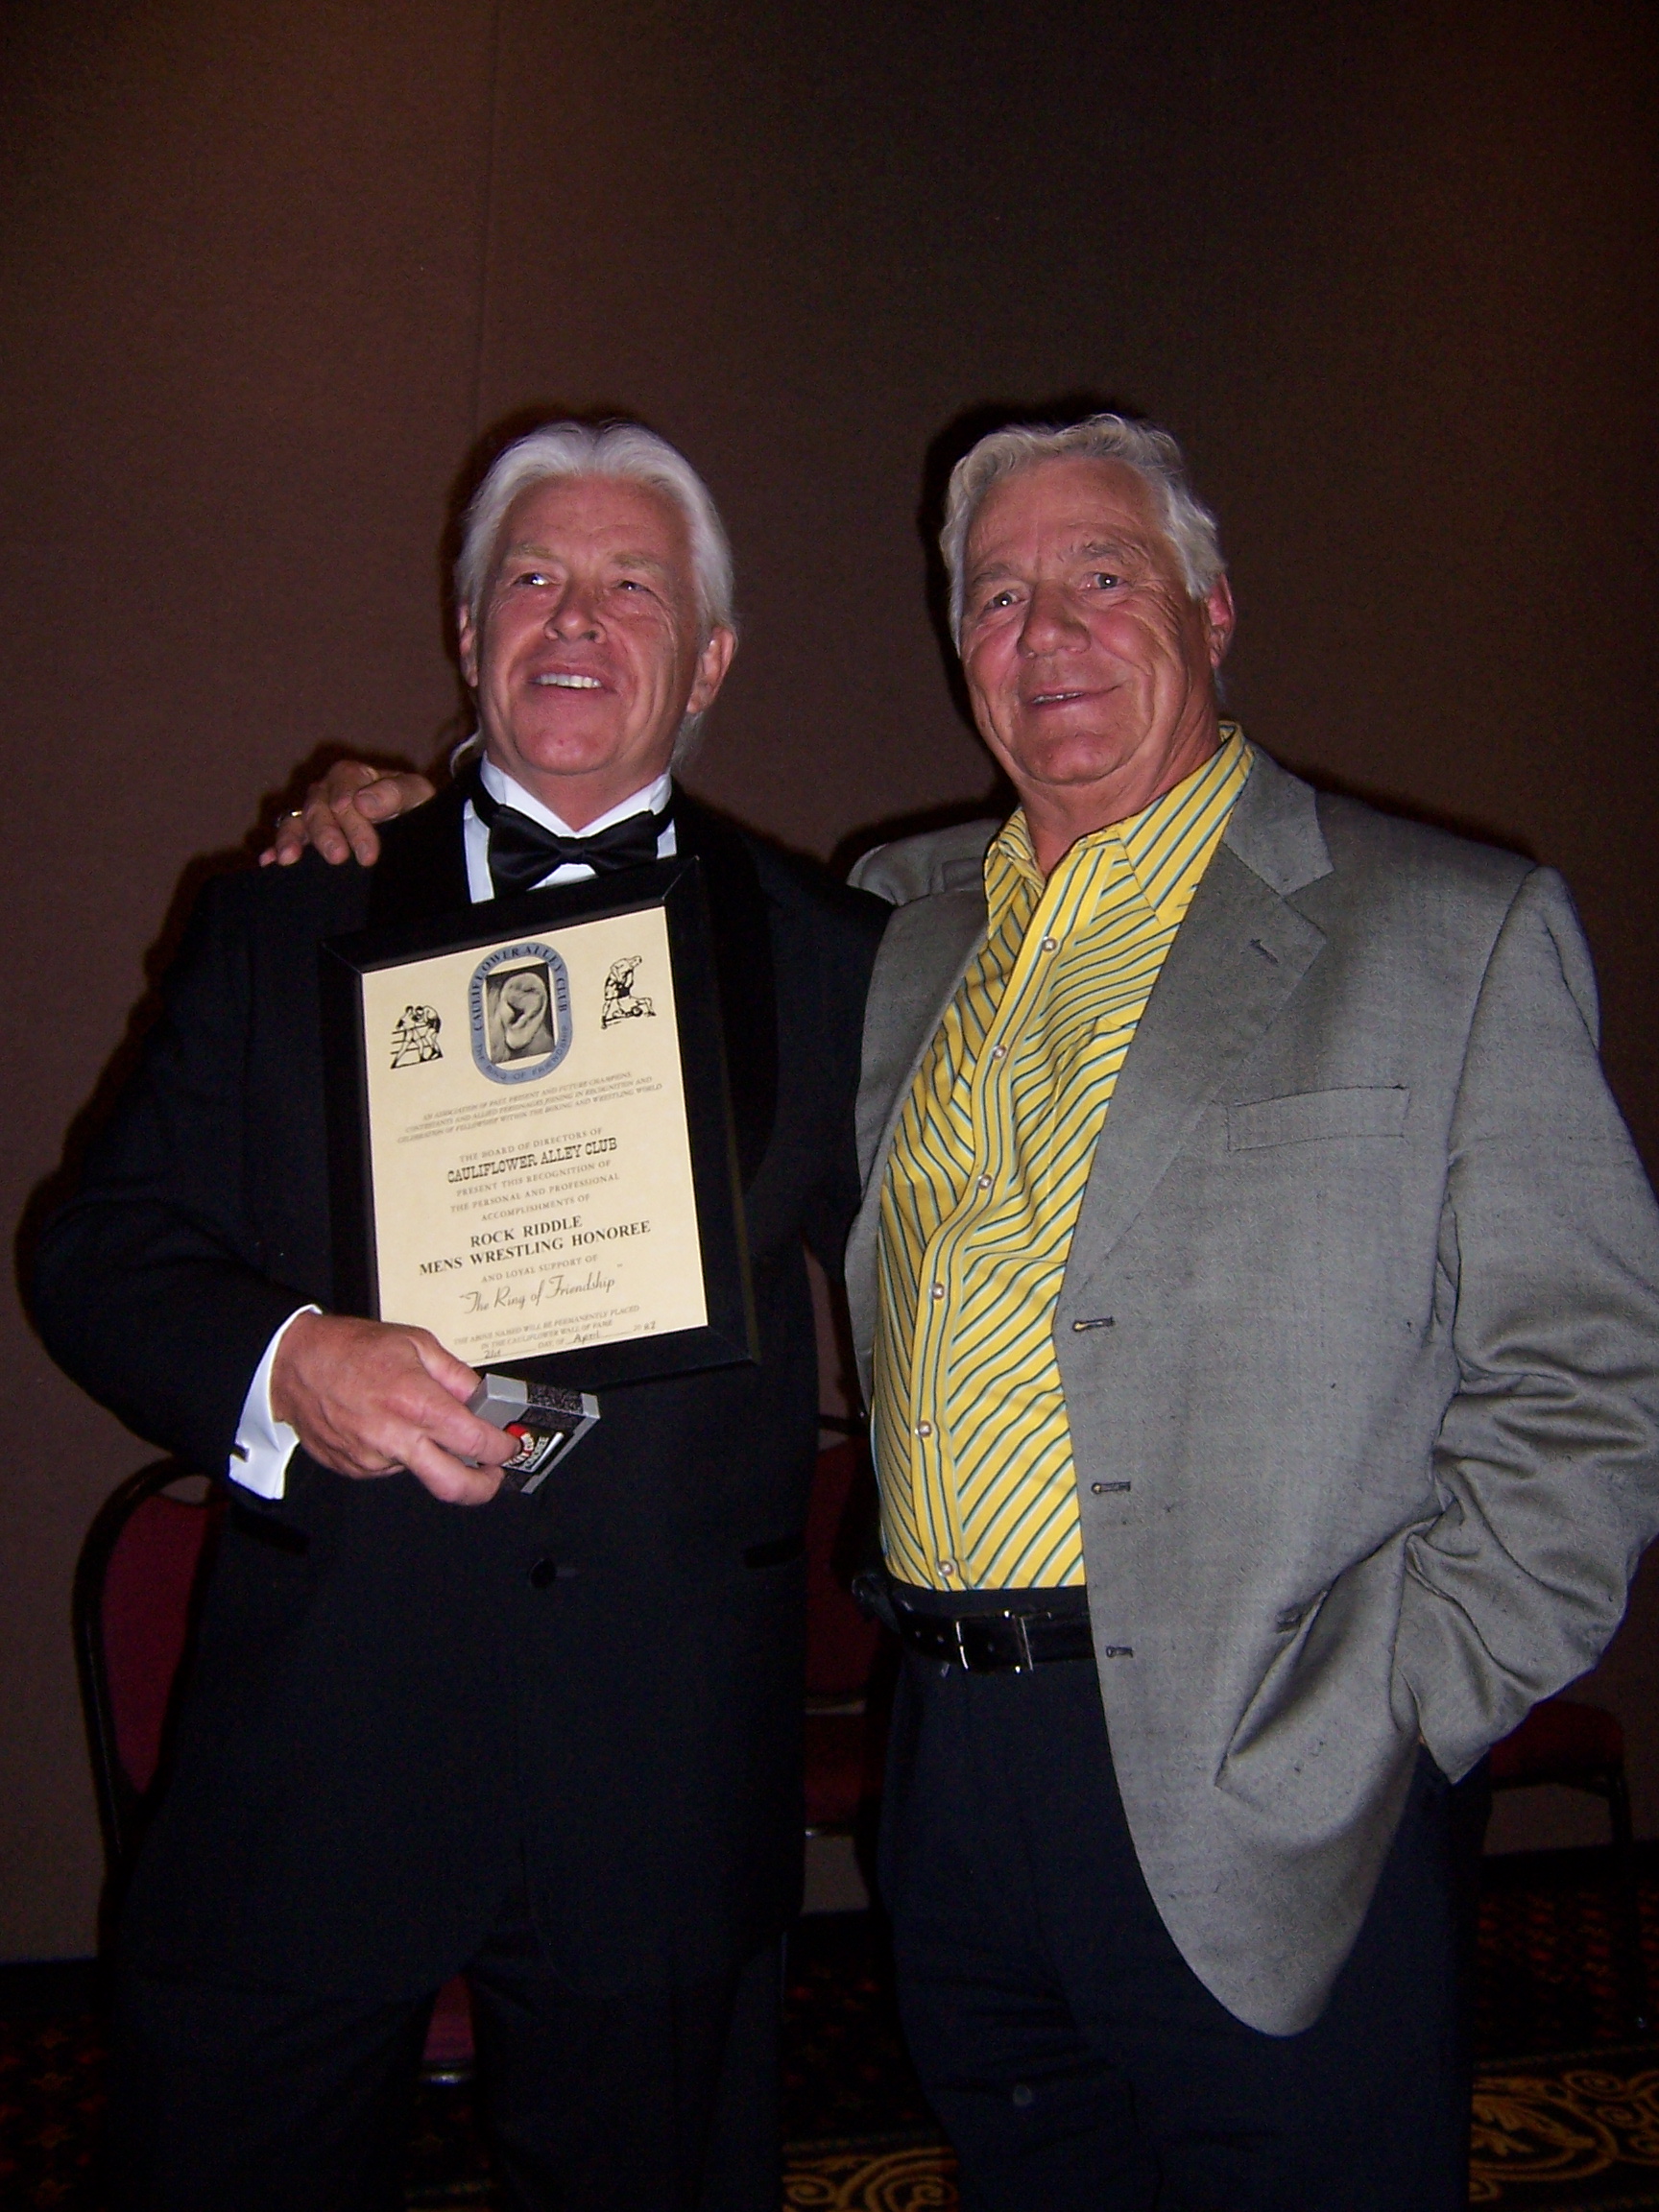 WWE Senior Vice President Pat Patterson Presents the 2007 Reel Honoree Award to Rock Riddle - CAC Convention, Las Vegas, NV